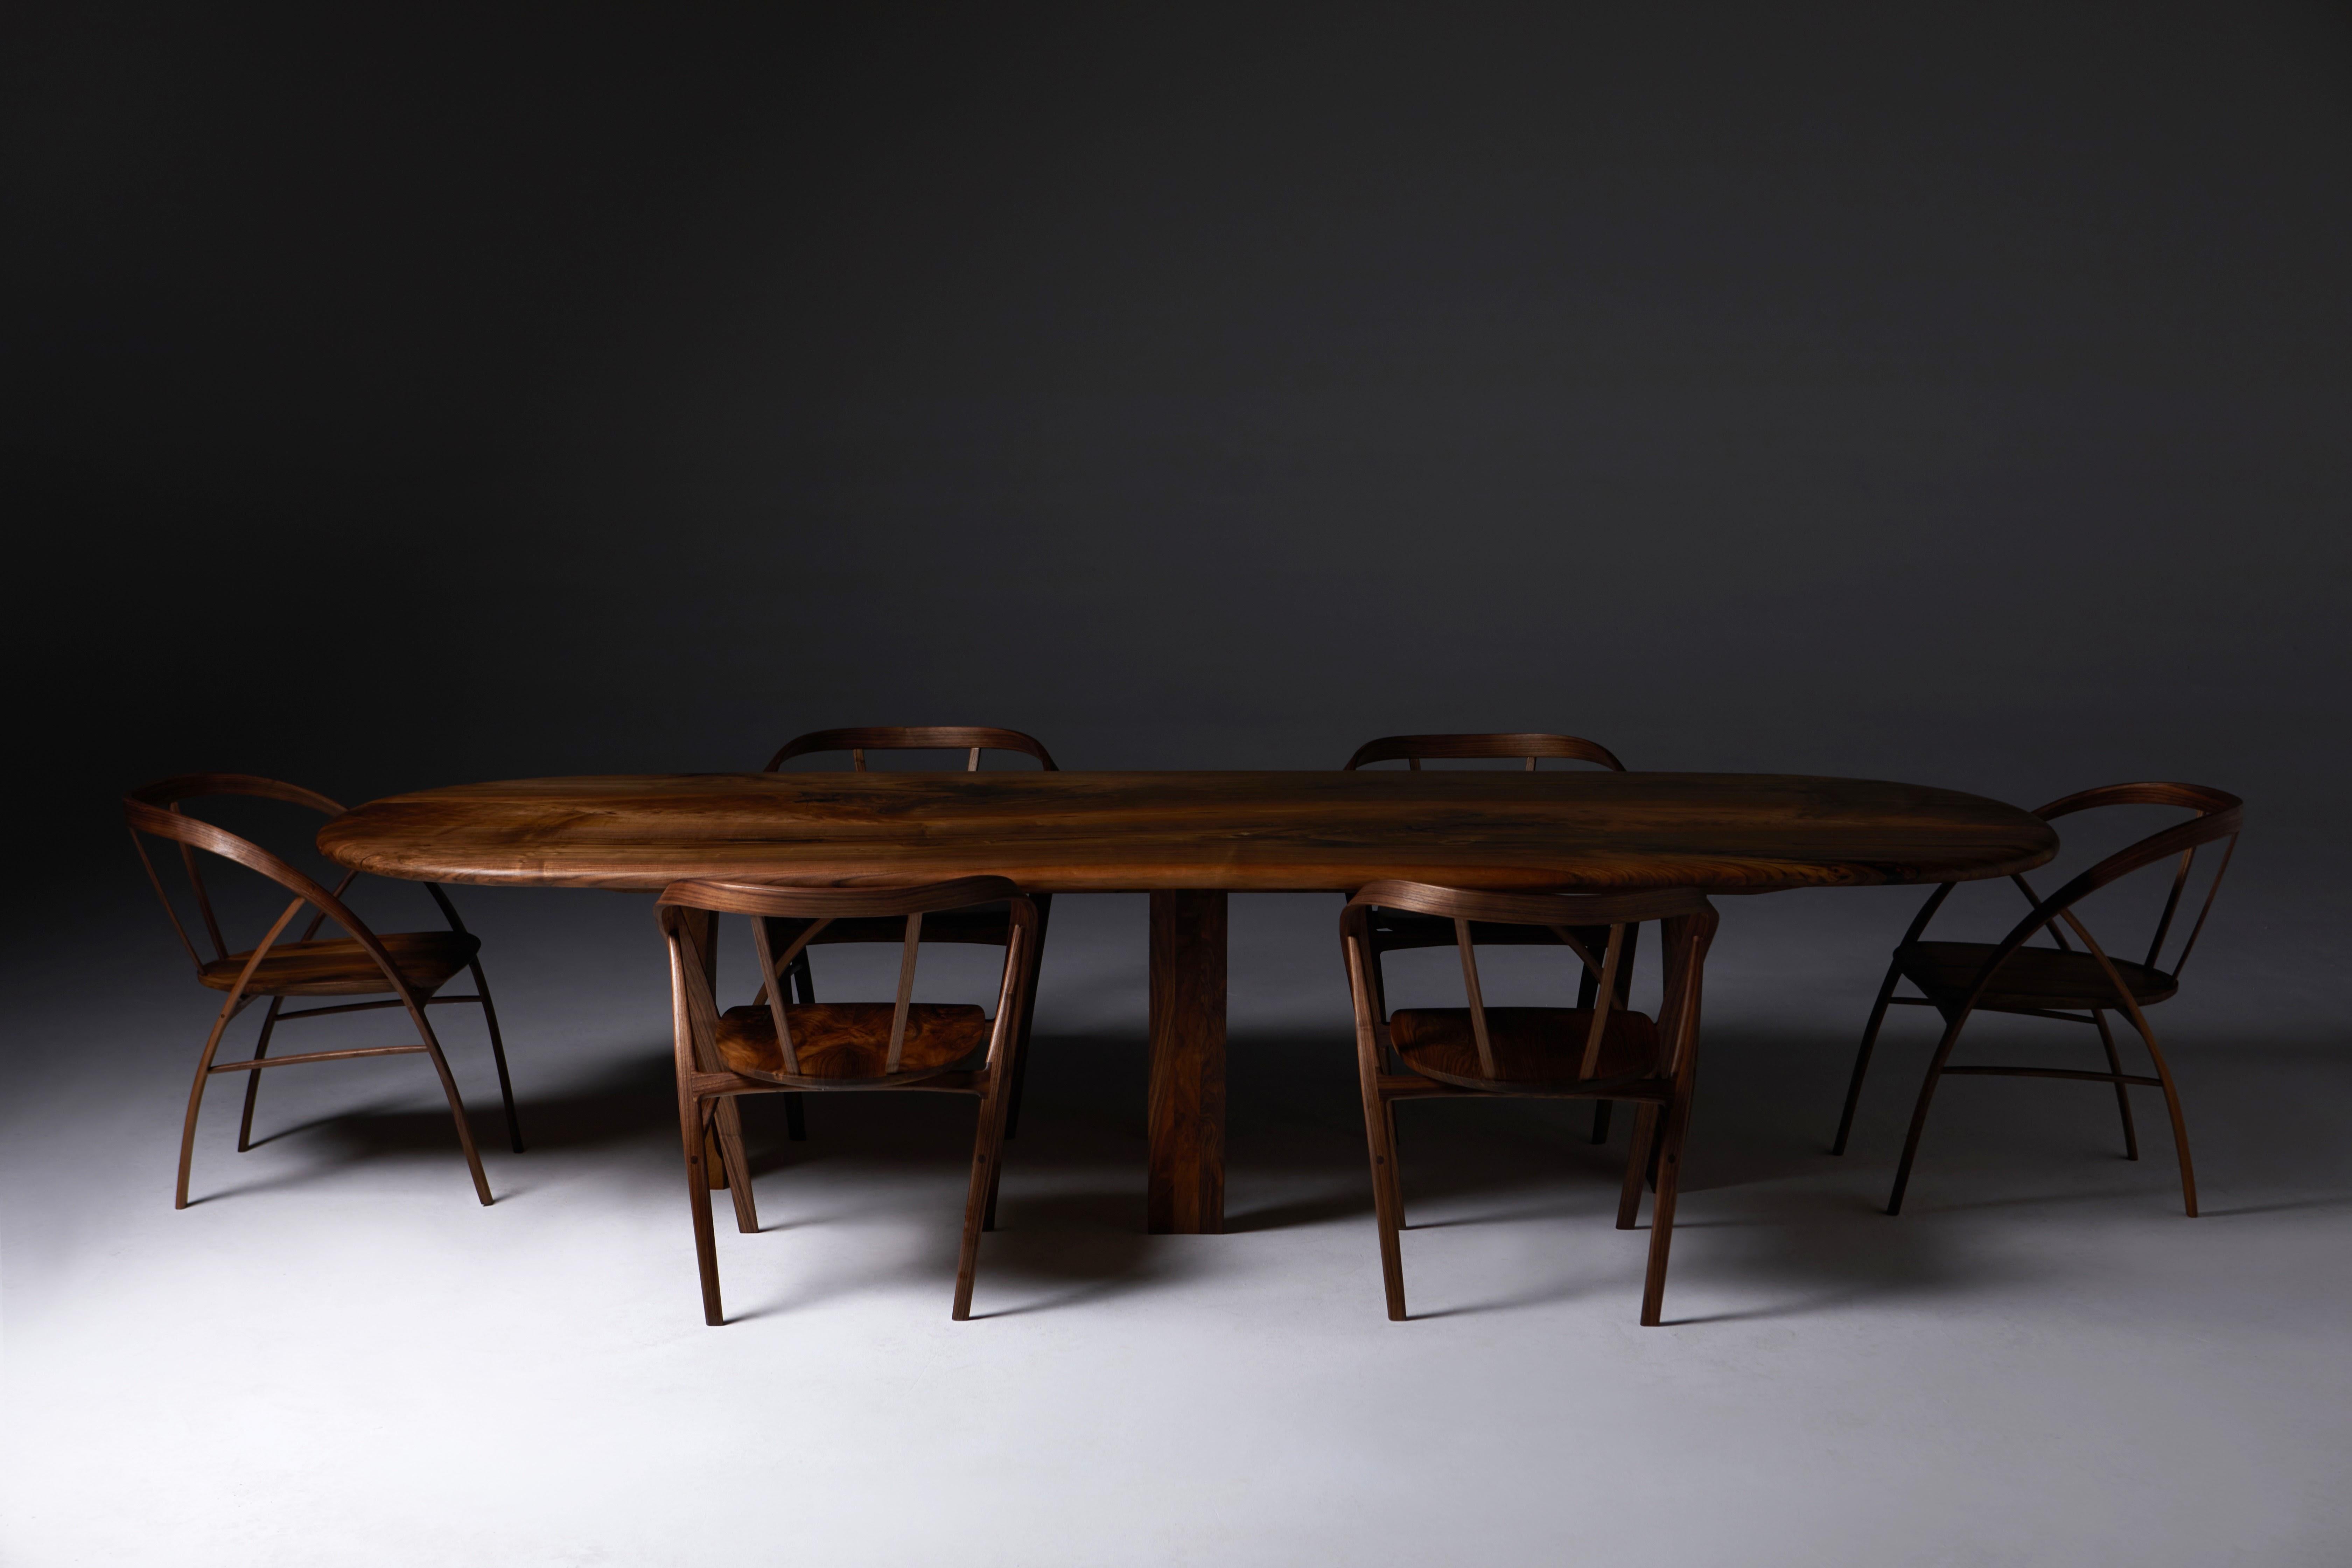 12 Carol Chairs (smaller version ) and the Oval pebble edge Table in walnut, 14ft x 4 ft. to the same design as  Item Ref: LU2899326437372.

The Sister Carol chair is a new smaller version, completed in Jan 2024, of the original Carol Chair launched